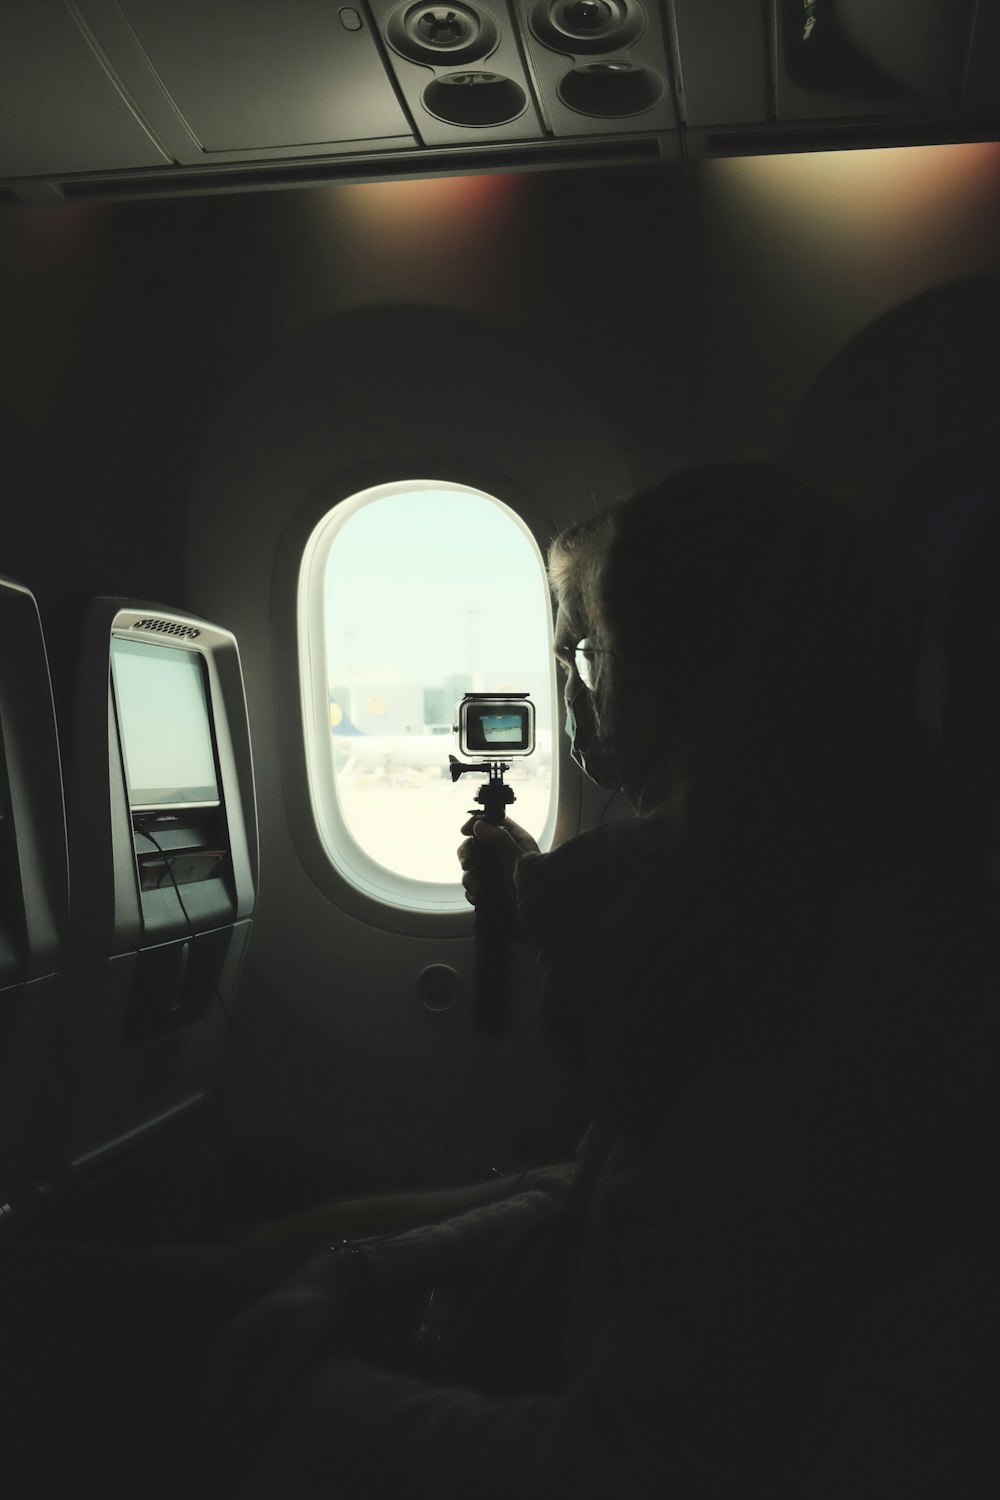 a person takes a picture of a plane